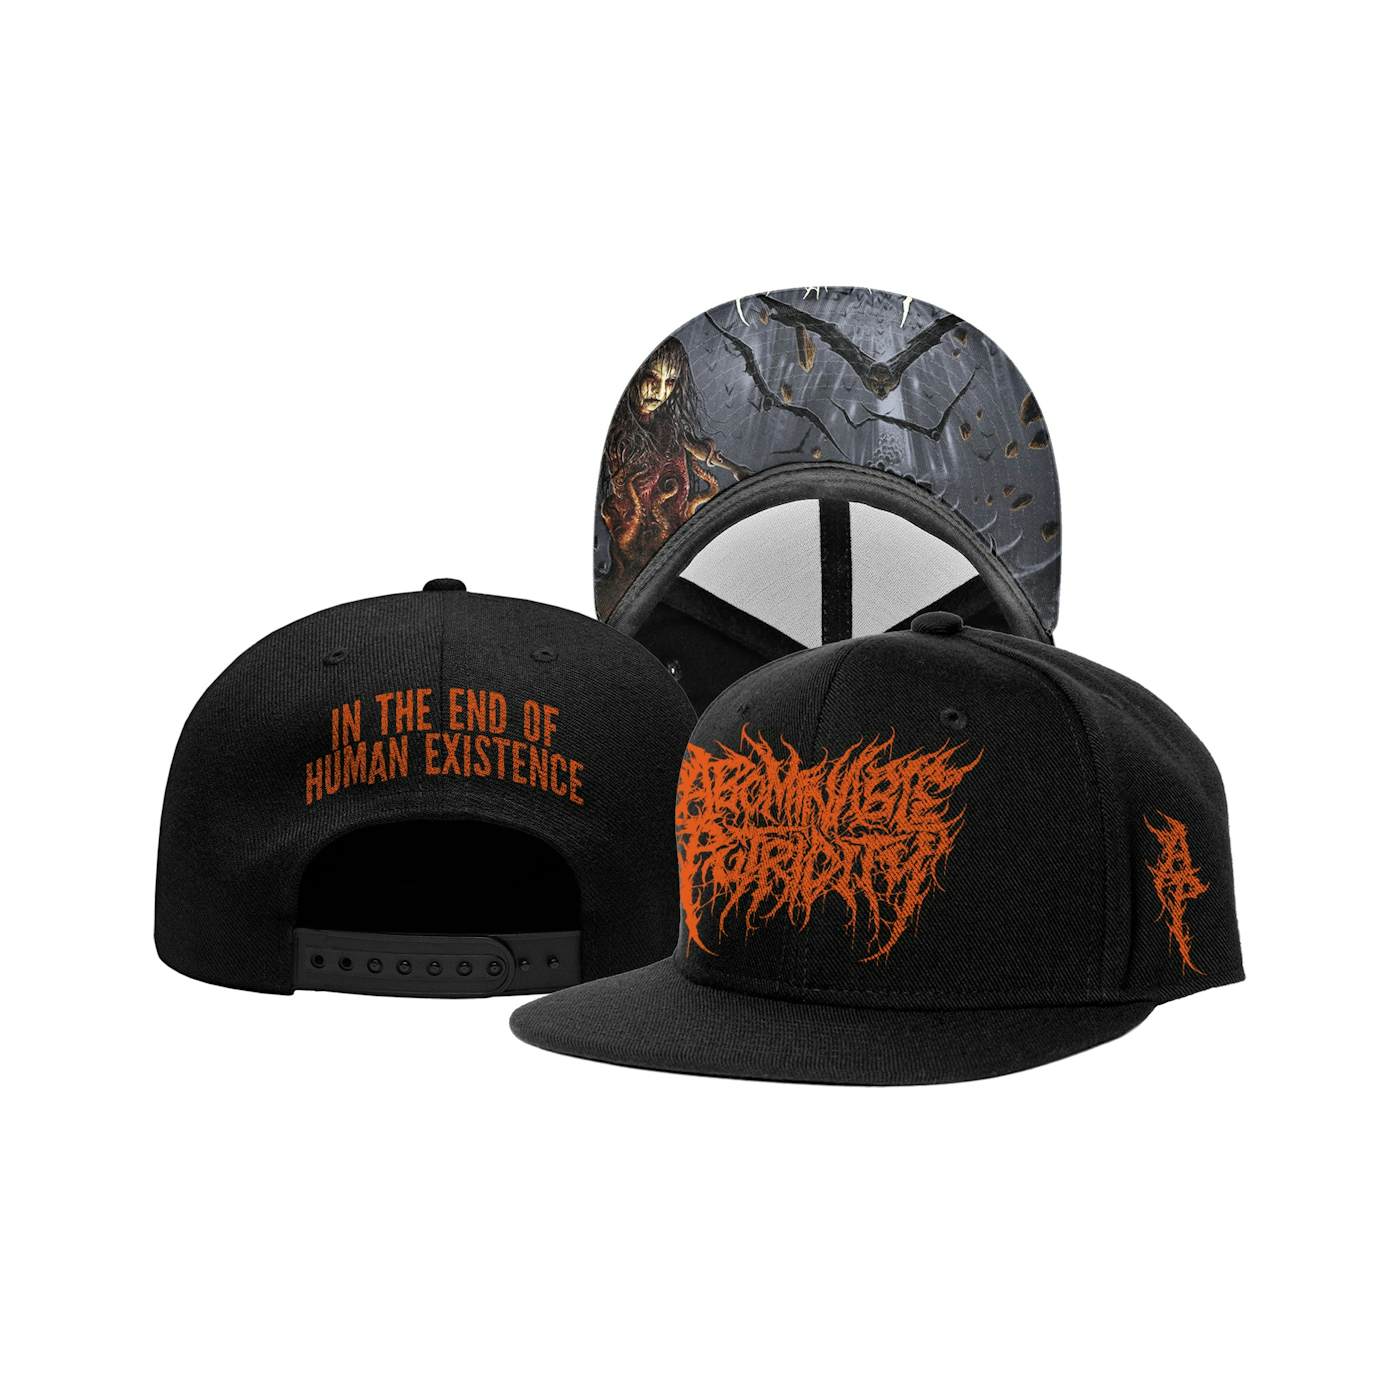 Abominable Putridity "In The End Of Human Existence" Hat